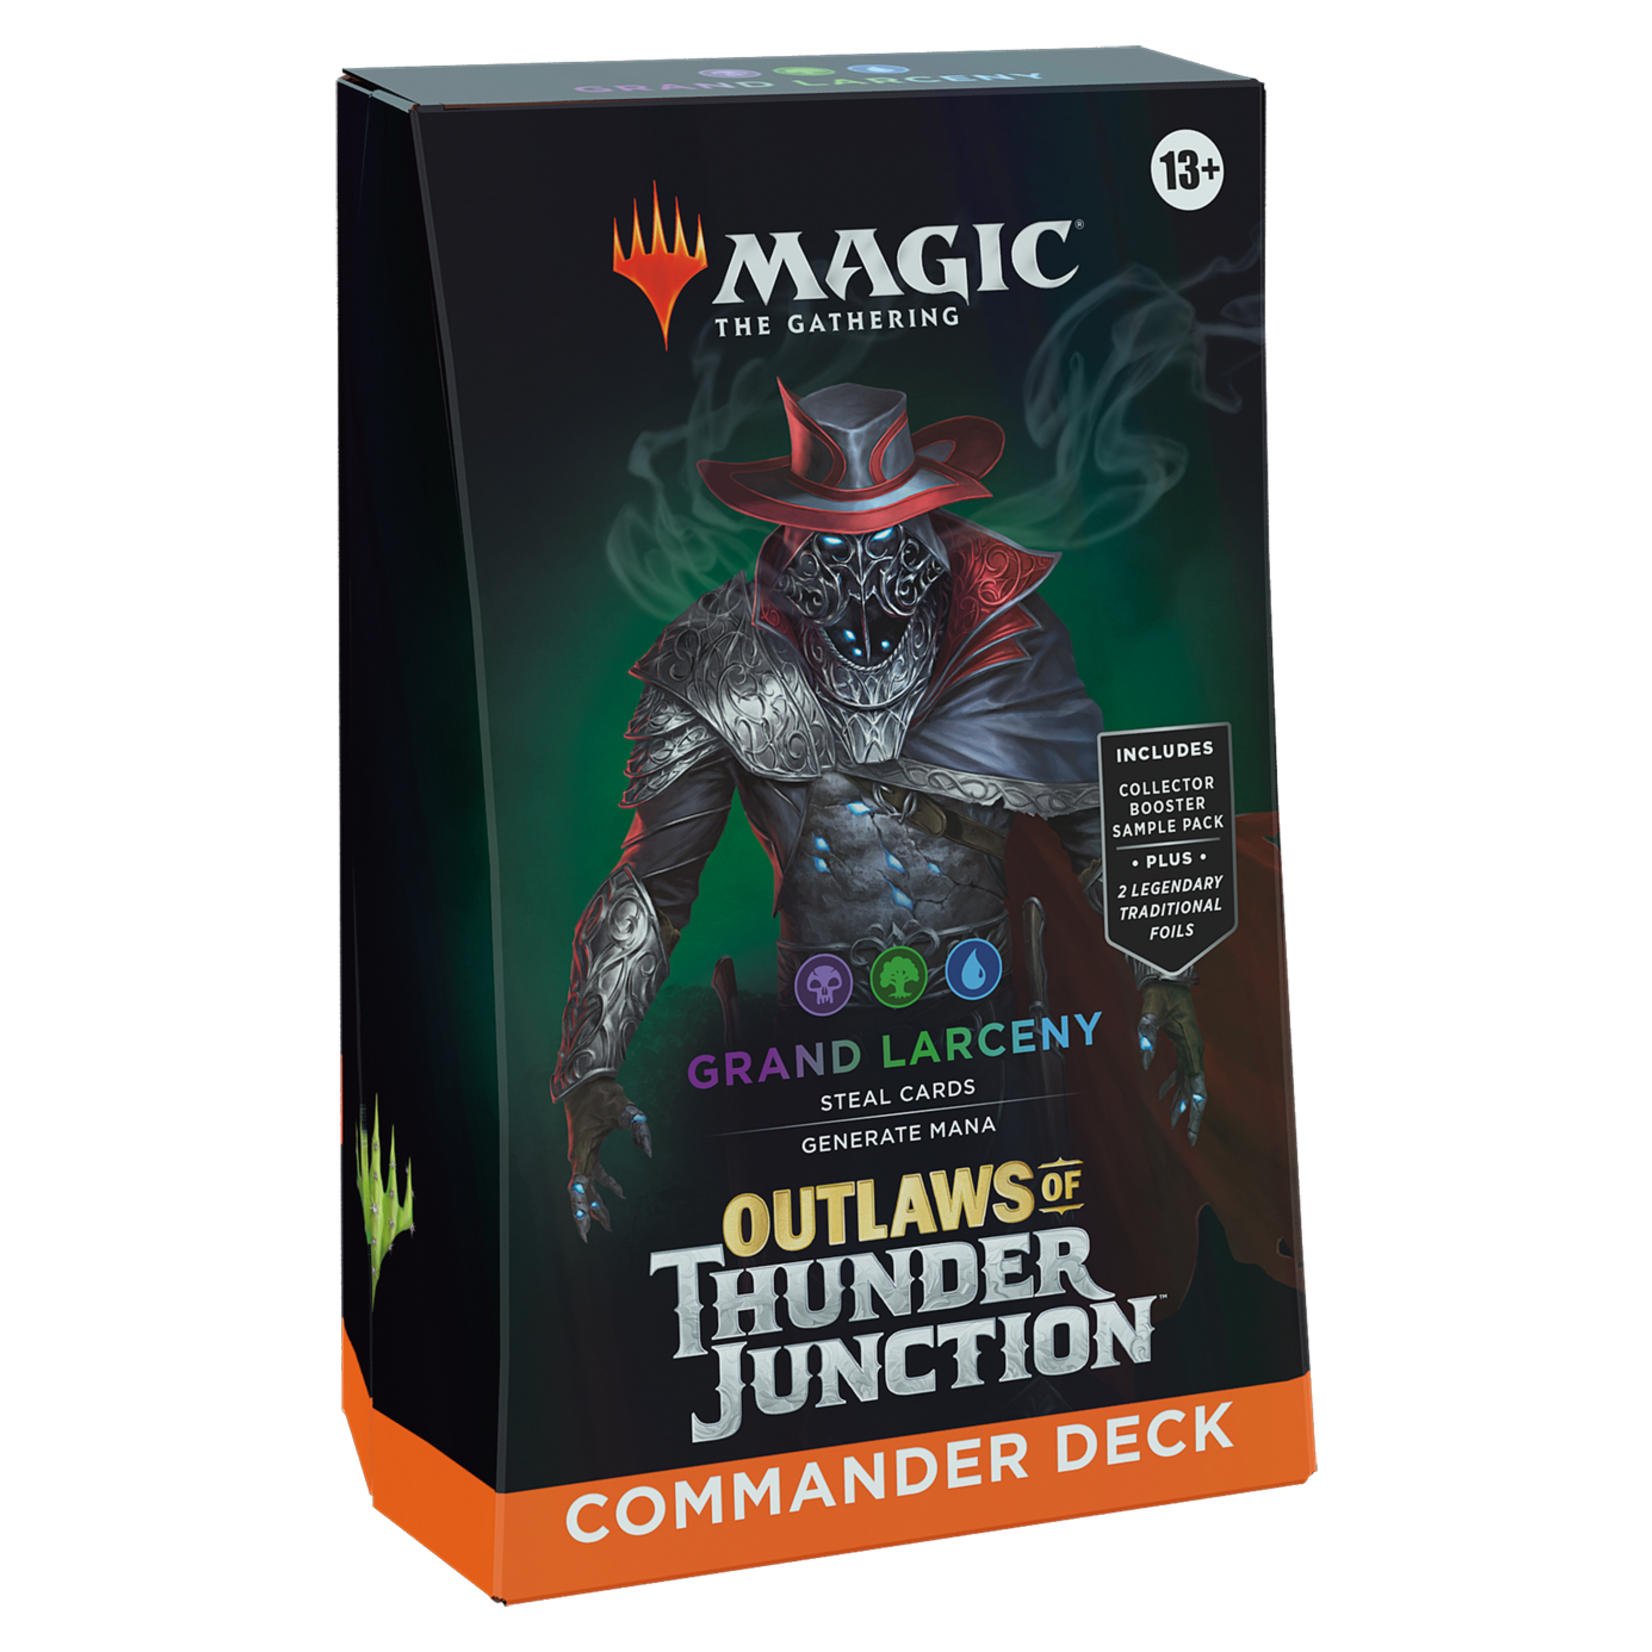 Magic: The Gathering Magic: The Gathering – Outlaws of Thunder Junction Commander Deck (Grand Larceny)